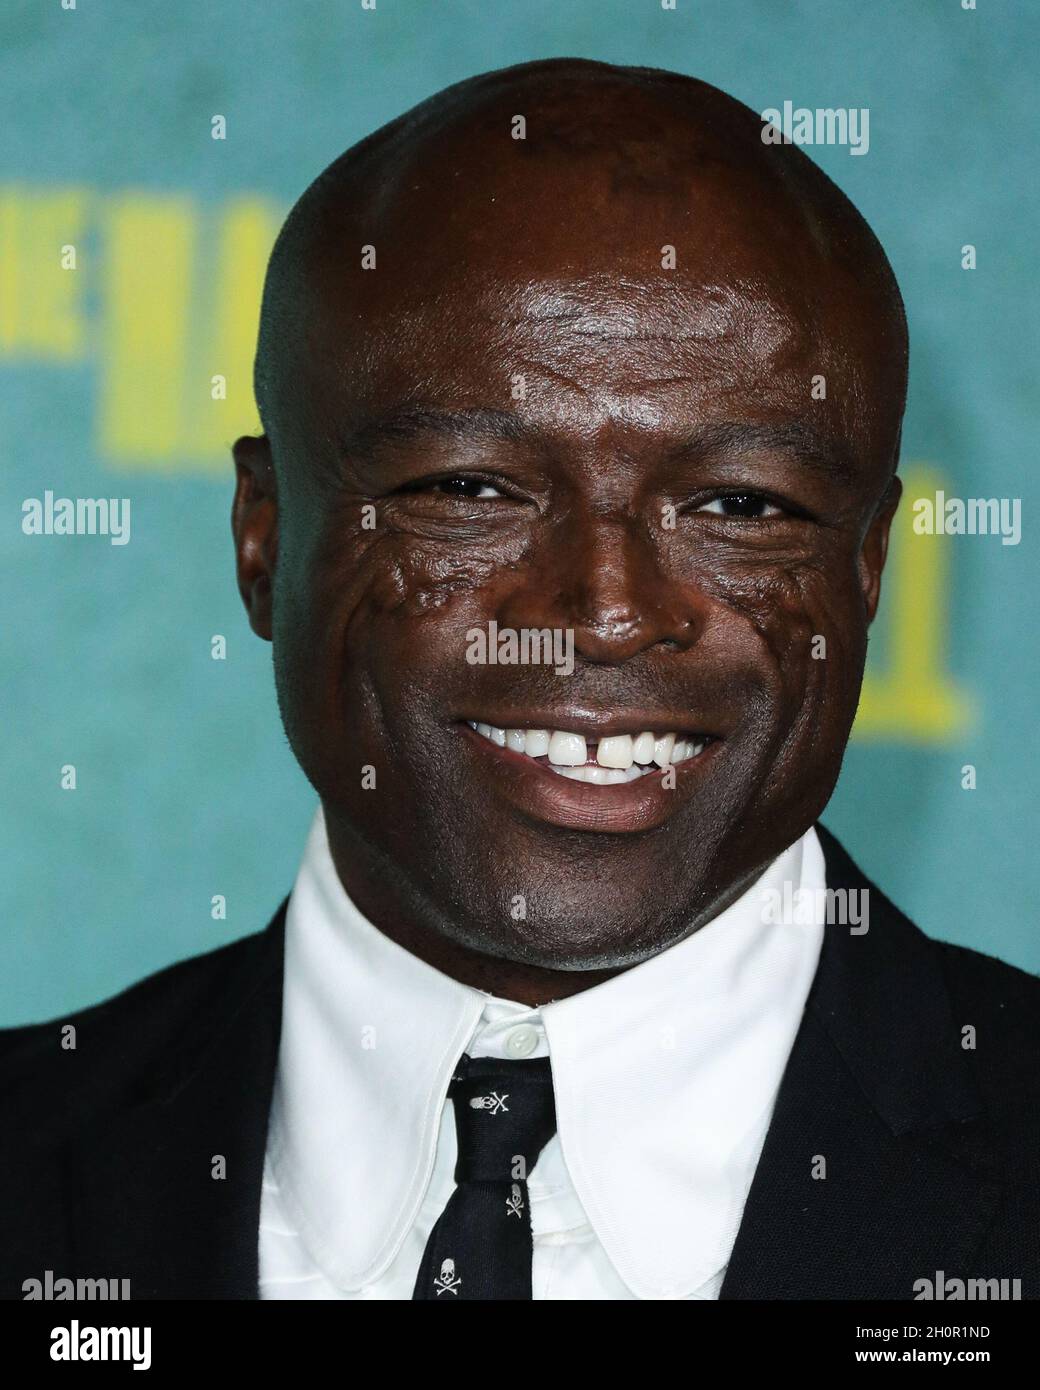 LOS ANGELES, CALIFORNIA, USA - OCTOBER 13: Singer-songwriter Seal (Henry Olusegun Adeola Samuel) arrives at the Los Angeles Premiere Of Netflix's 'The Harder They Fall' held at the Shrine Auditorium and Expo Hall on October 13, 2021 in Los Angeles, California, United States. (Photo by Xavier Collin/Image Press Agency) Stock Photo